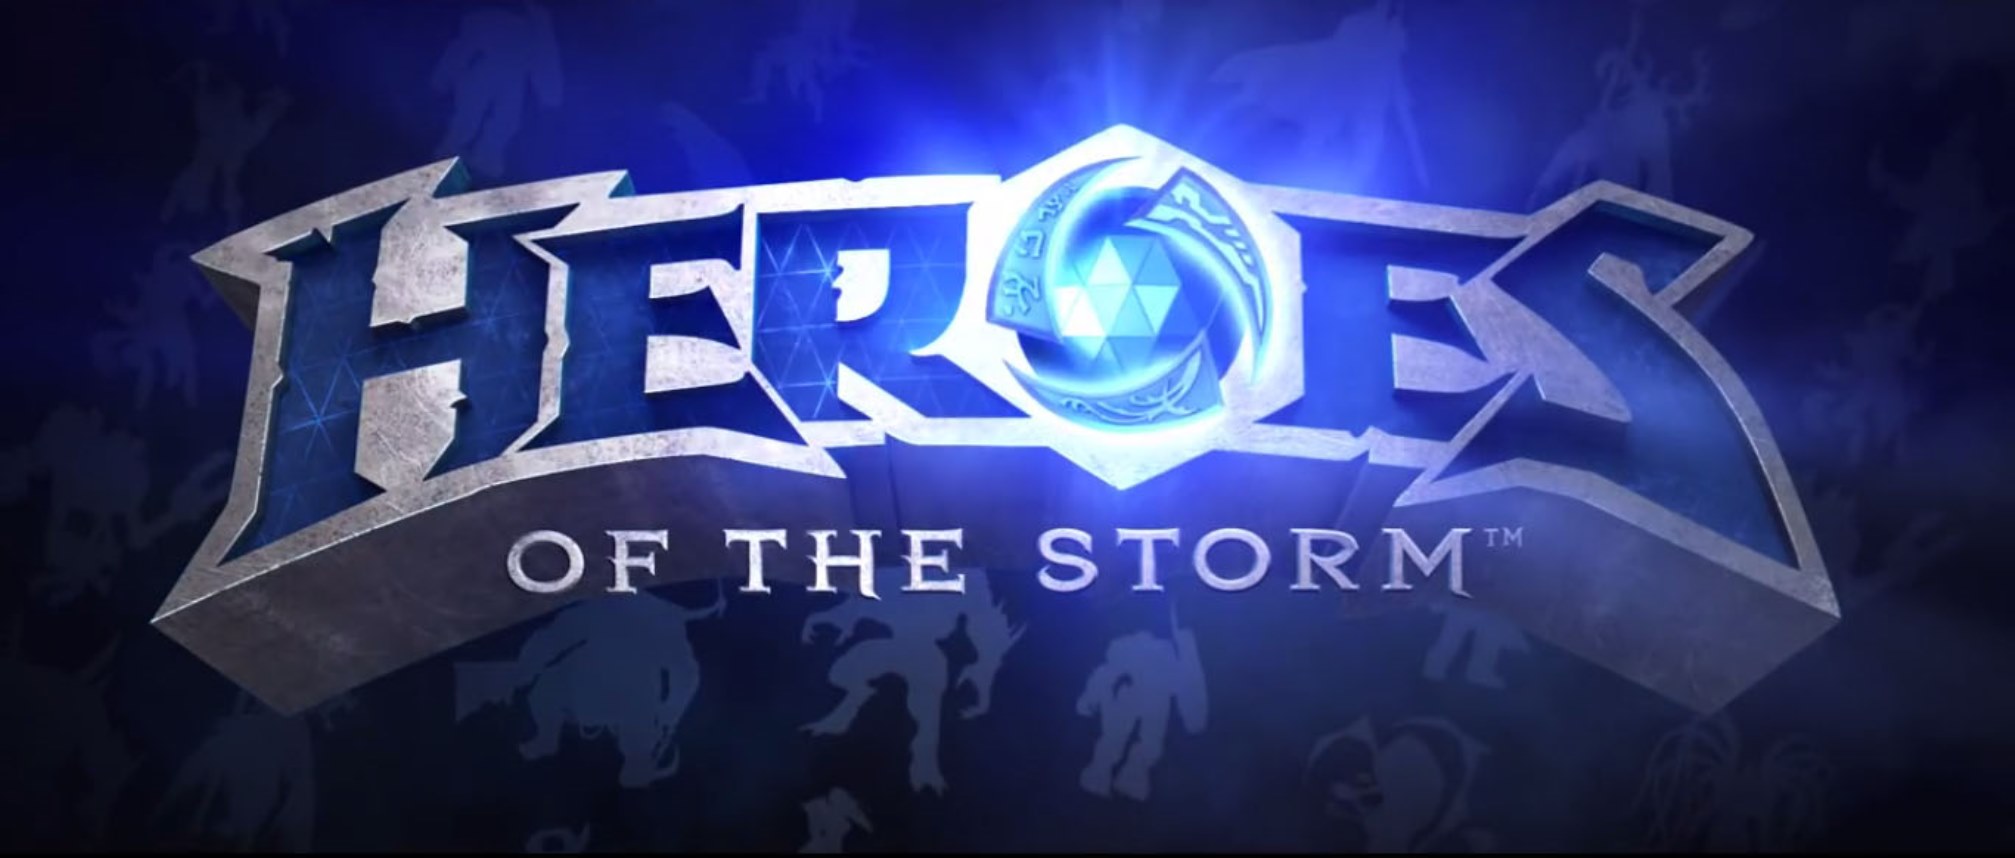 Heroes Of The Storm - HD Wallpaper 